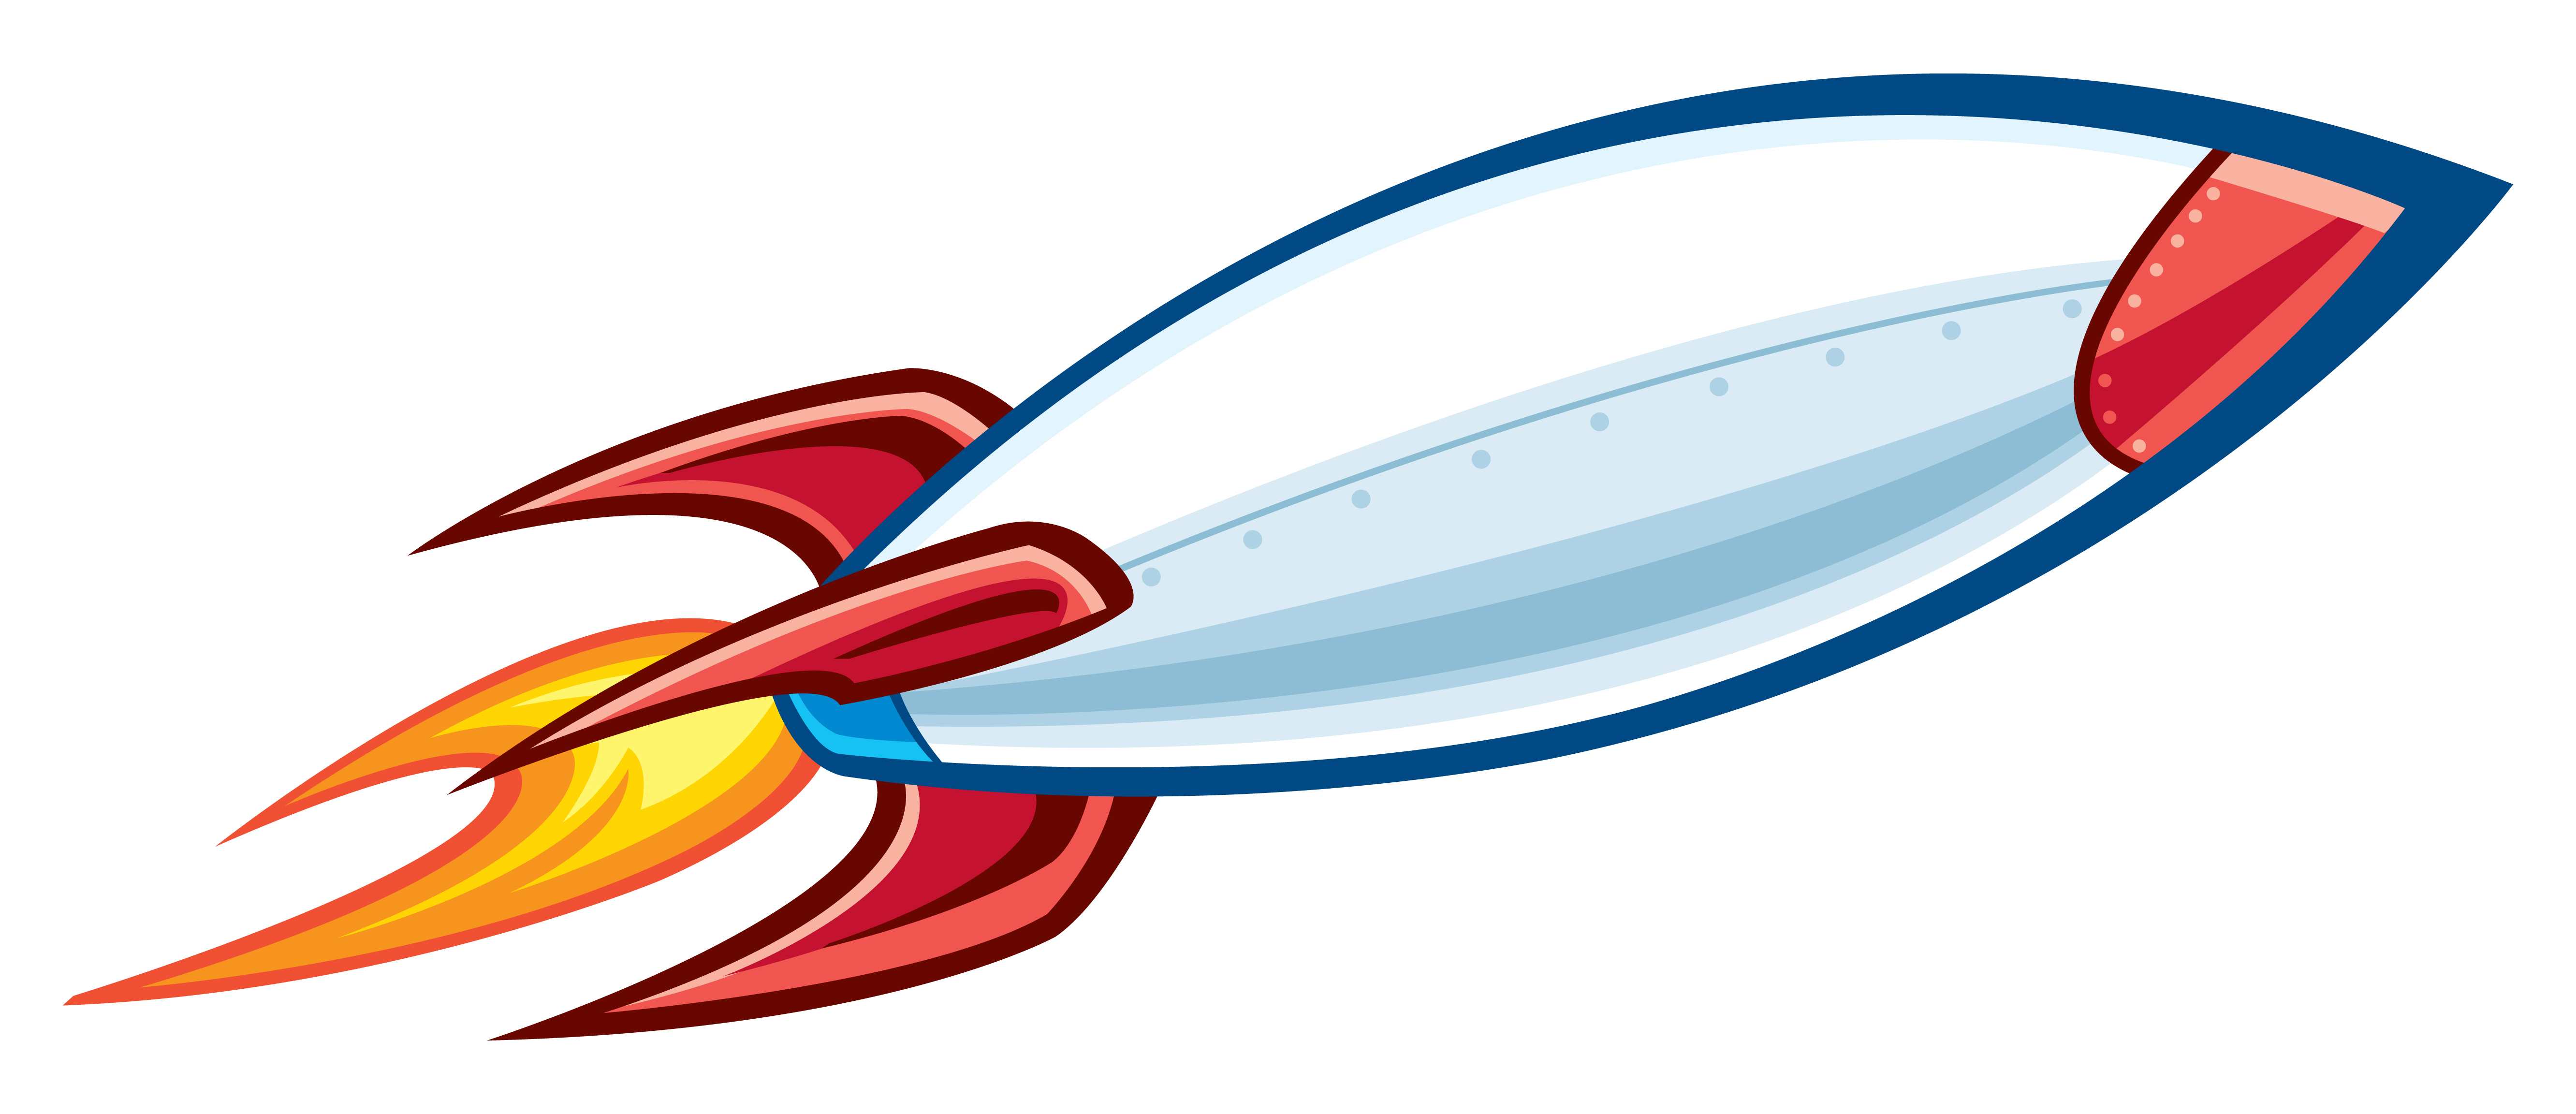 16 Cartoon Rocket Free Cliparts That You Can Download To You Computer